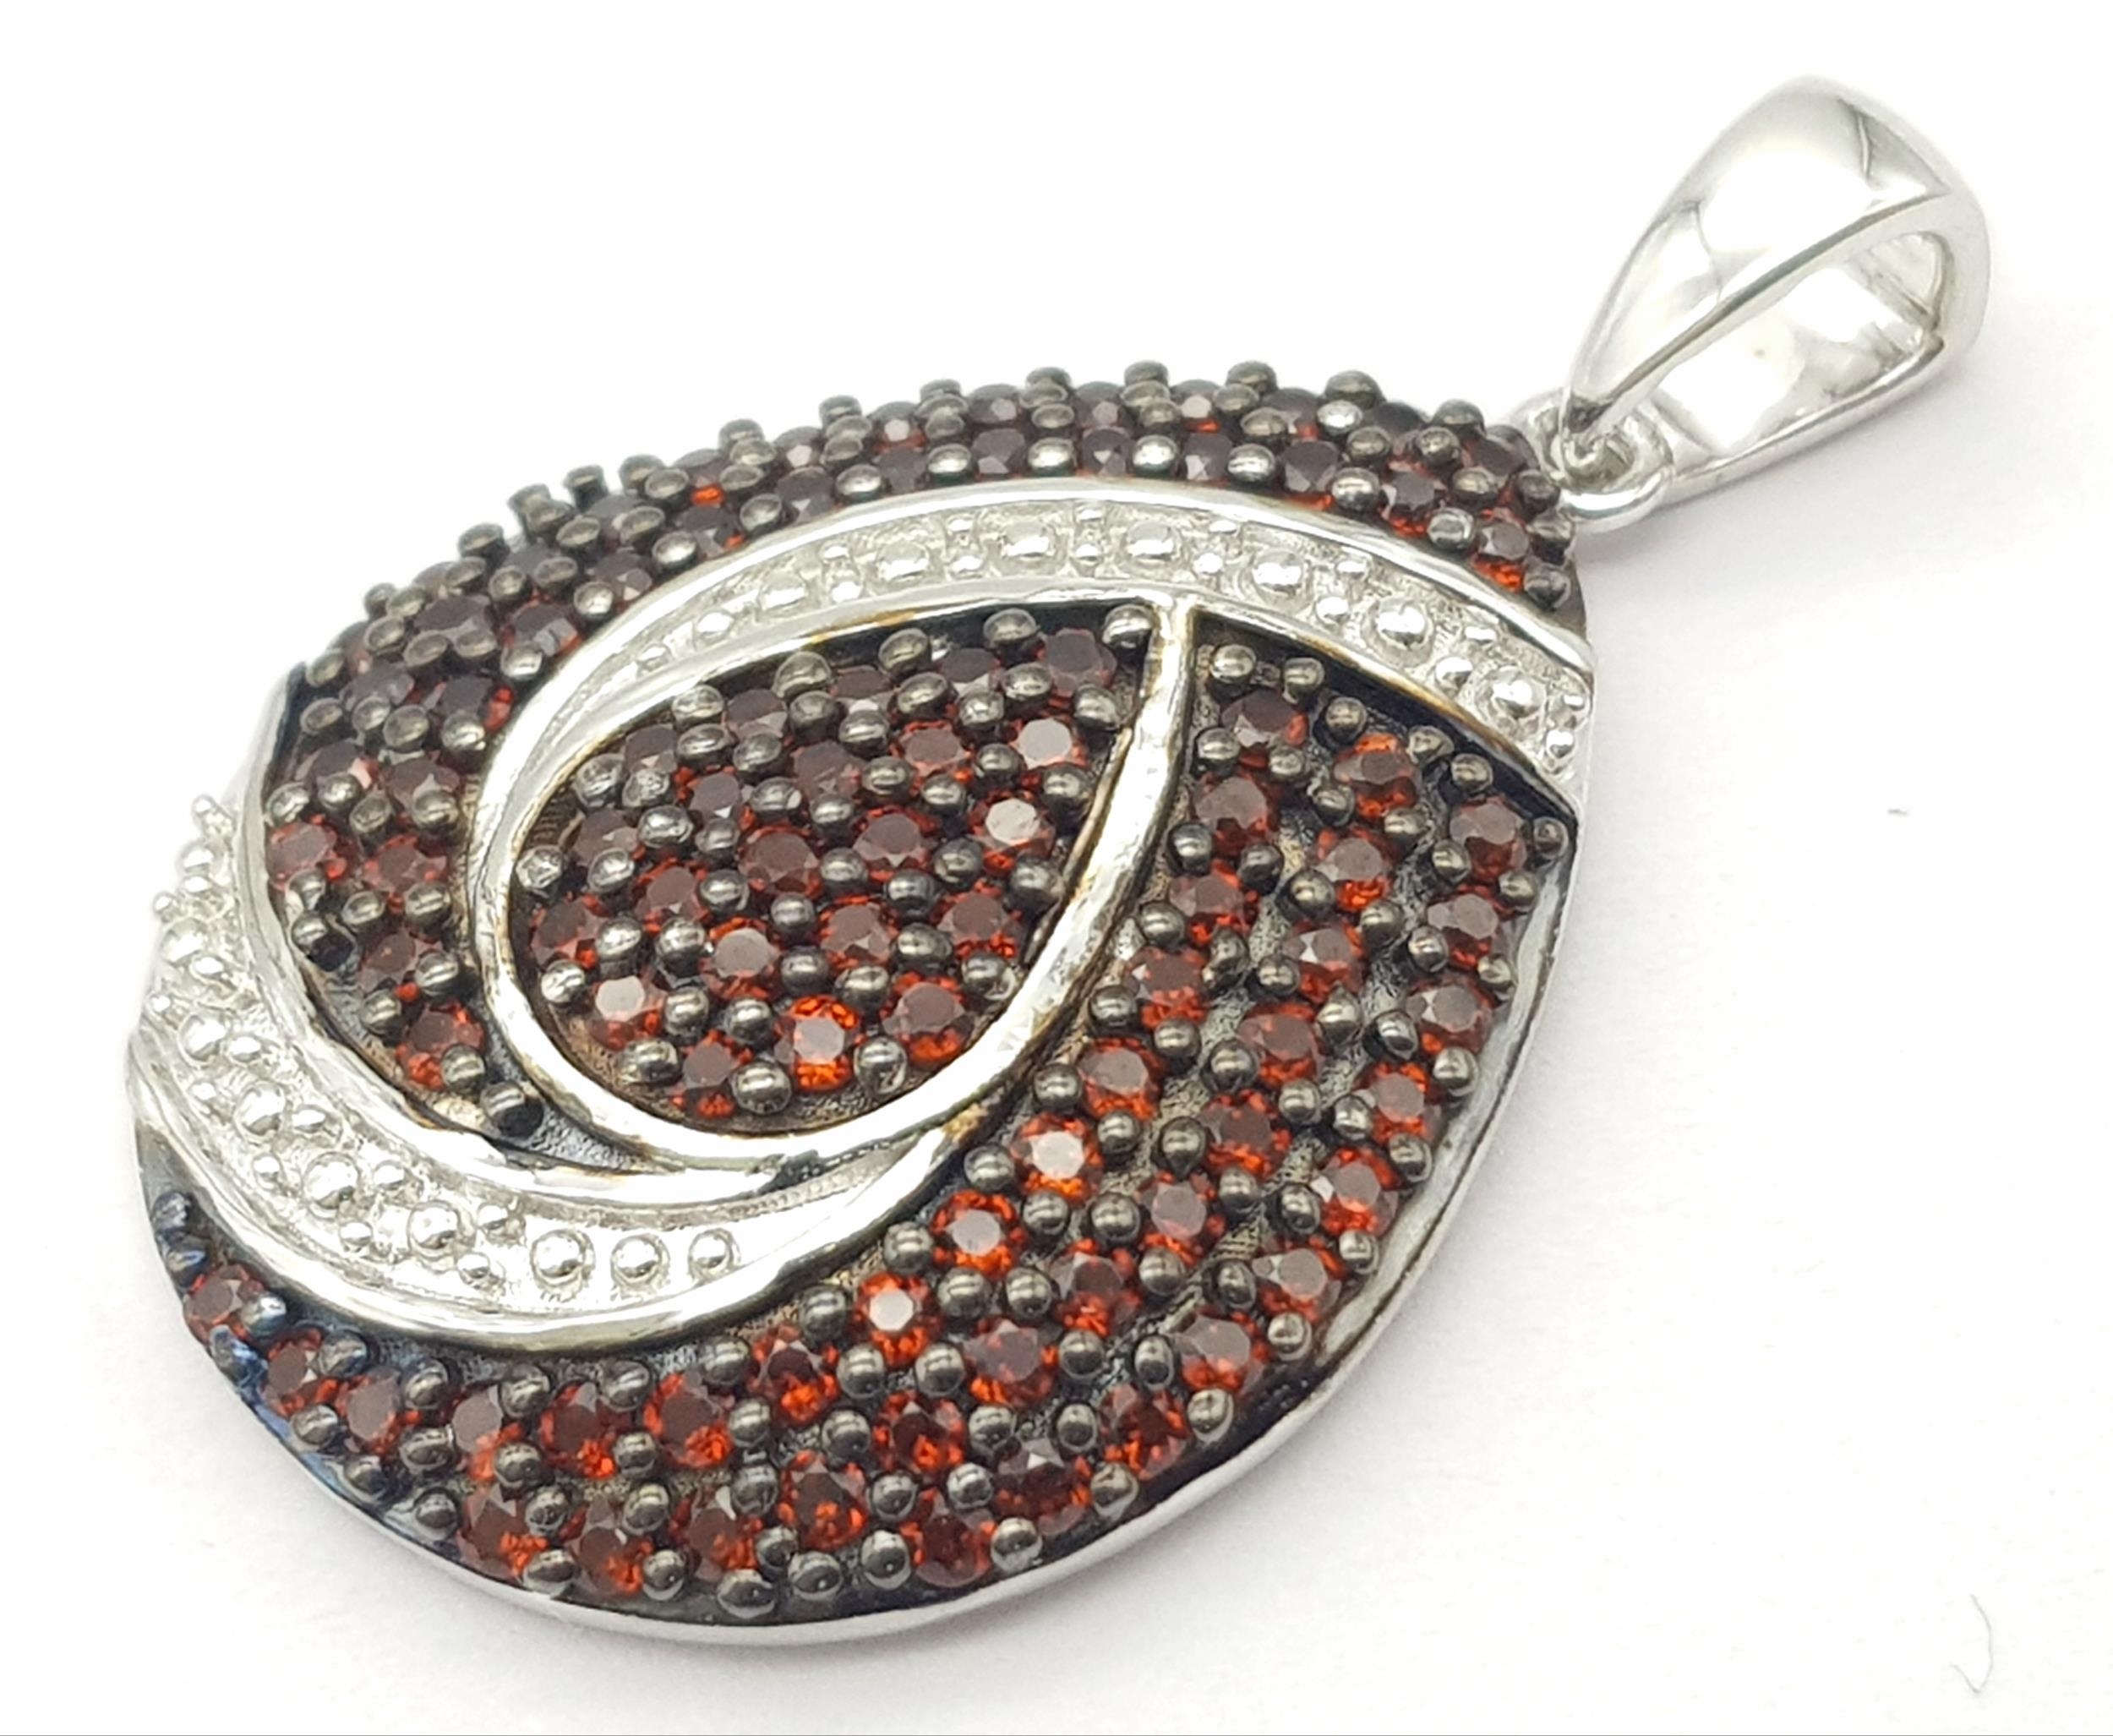 An Unworn, Fully Certified Limited Edition (1 of 50), Sterling Silver and Anthill Garnet Pendant.